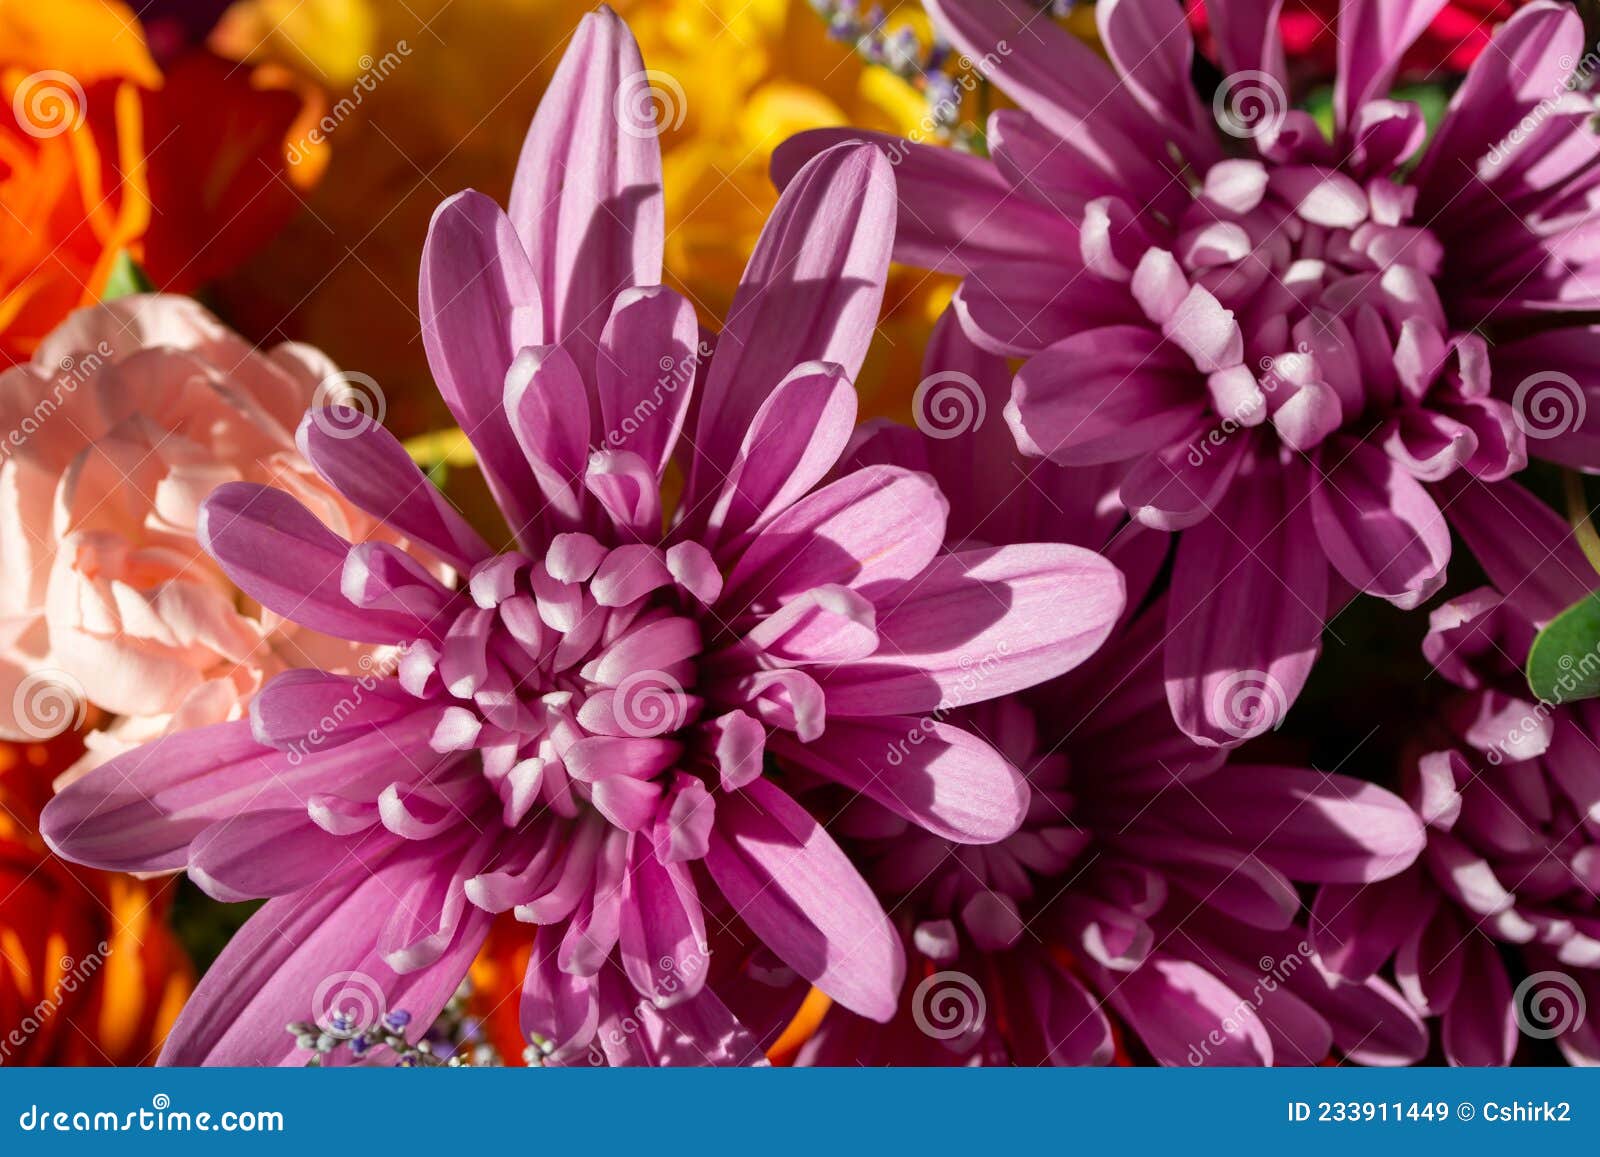 macro view of pink aster flower blossoms